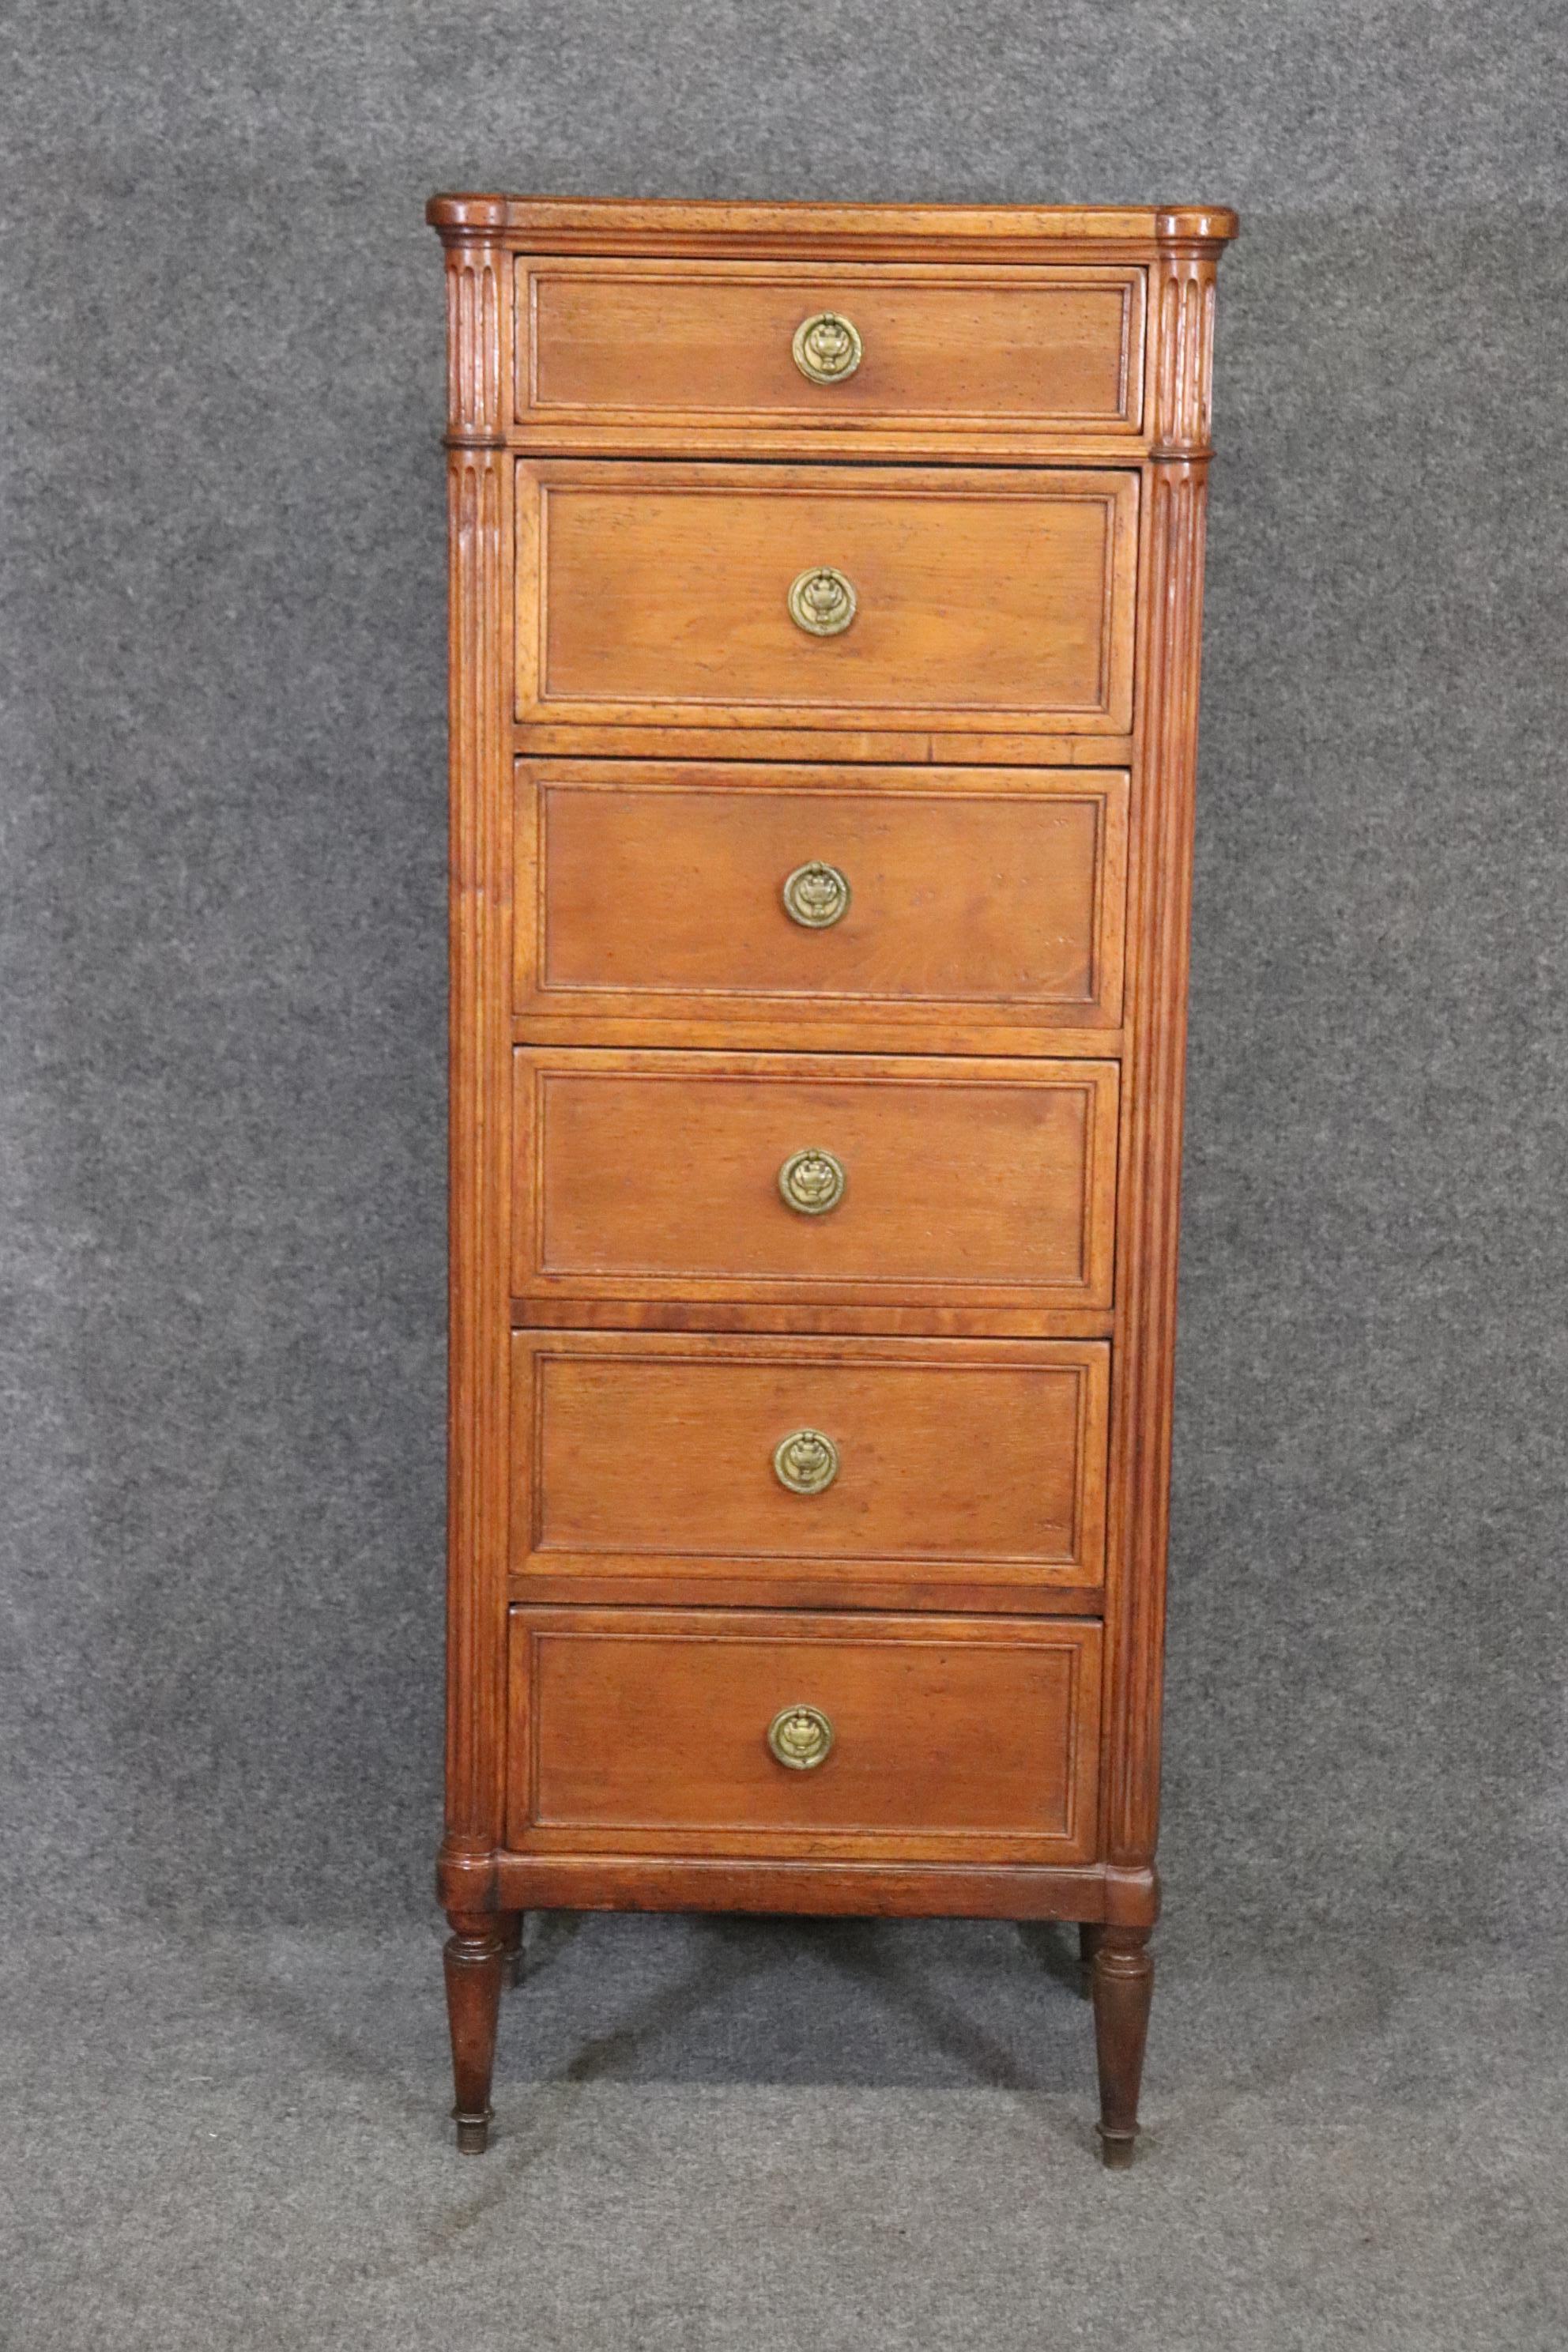 This Louis XVI style lingerie chest is made of the highest quality and looks like it could possibly be made by the world famous furniture company Baker. This chest is made of high end walnut and accompanied by brass hardware. This is the perfect